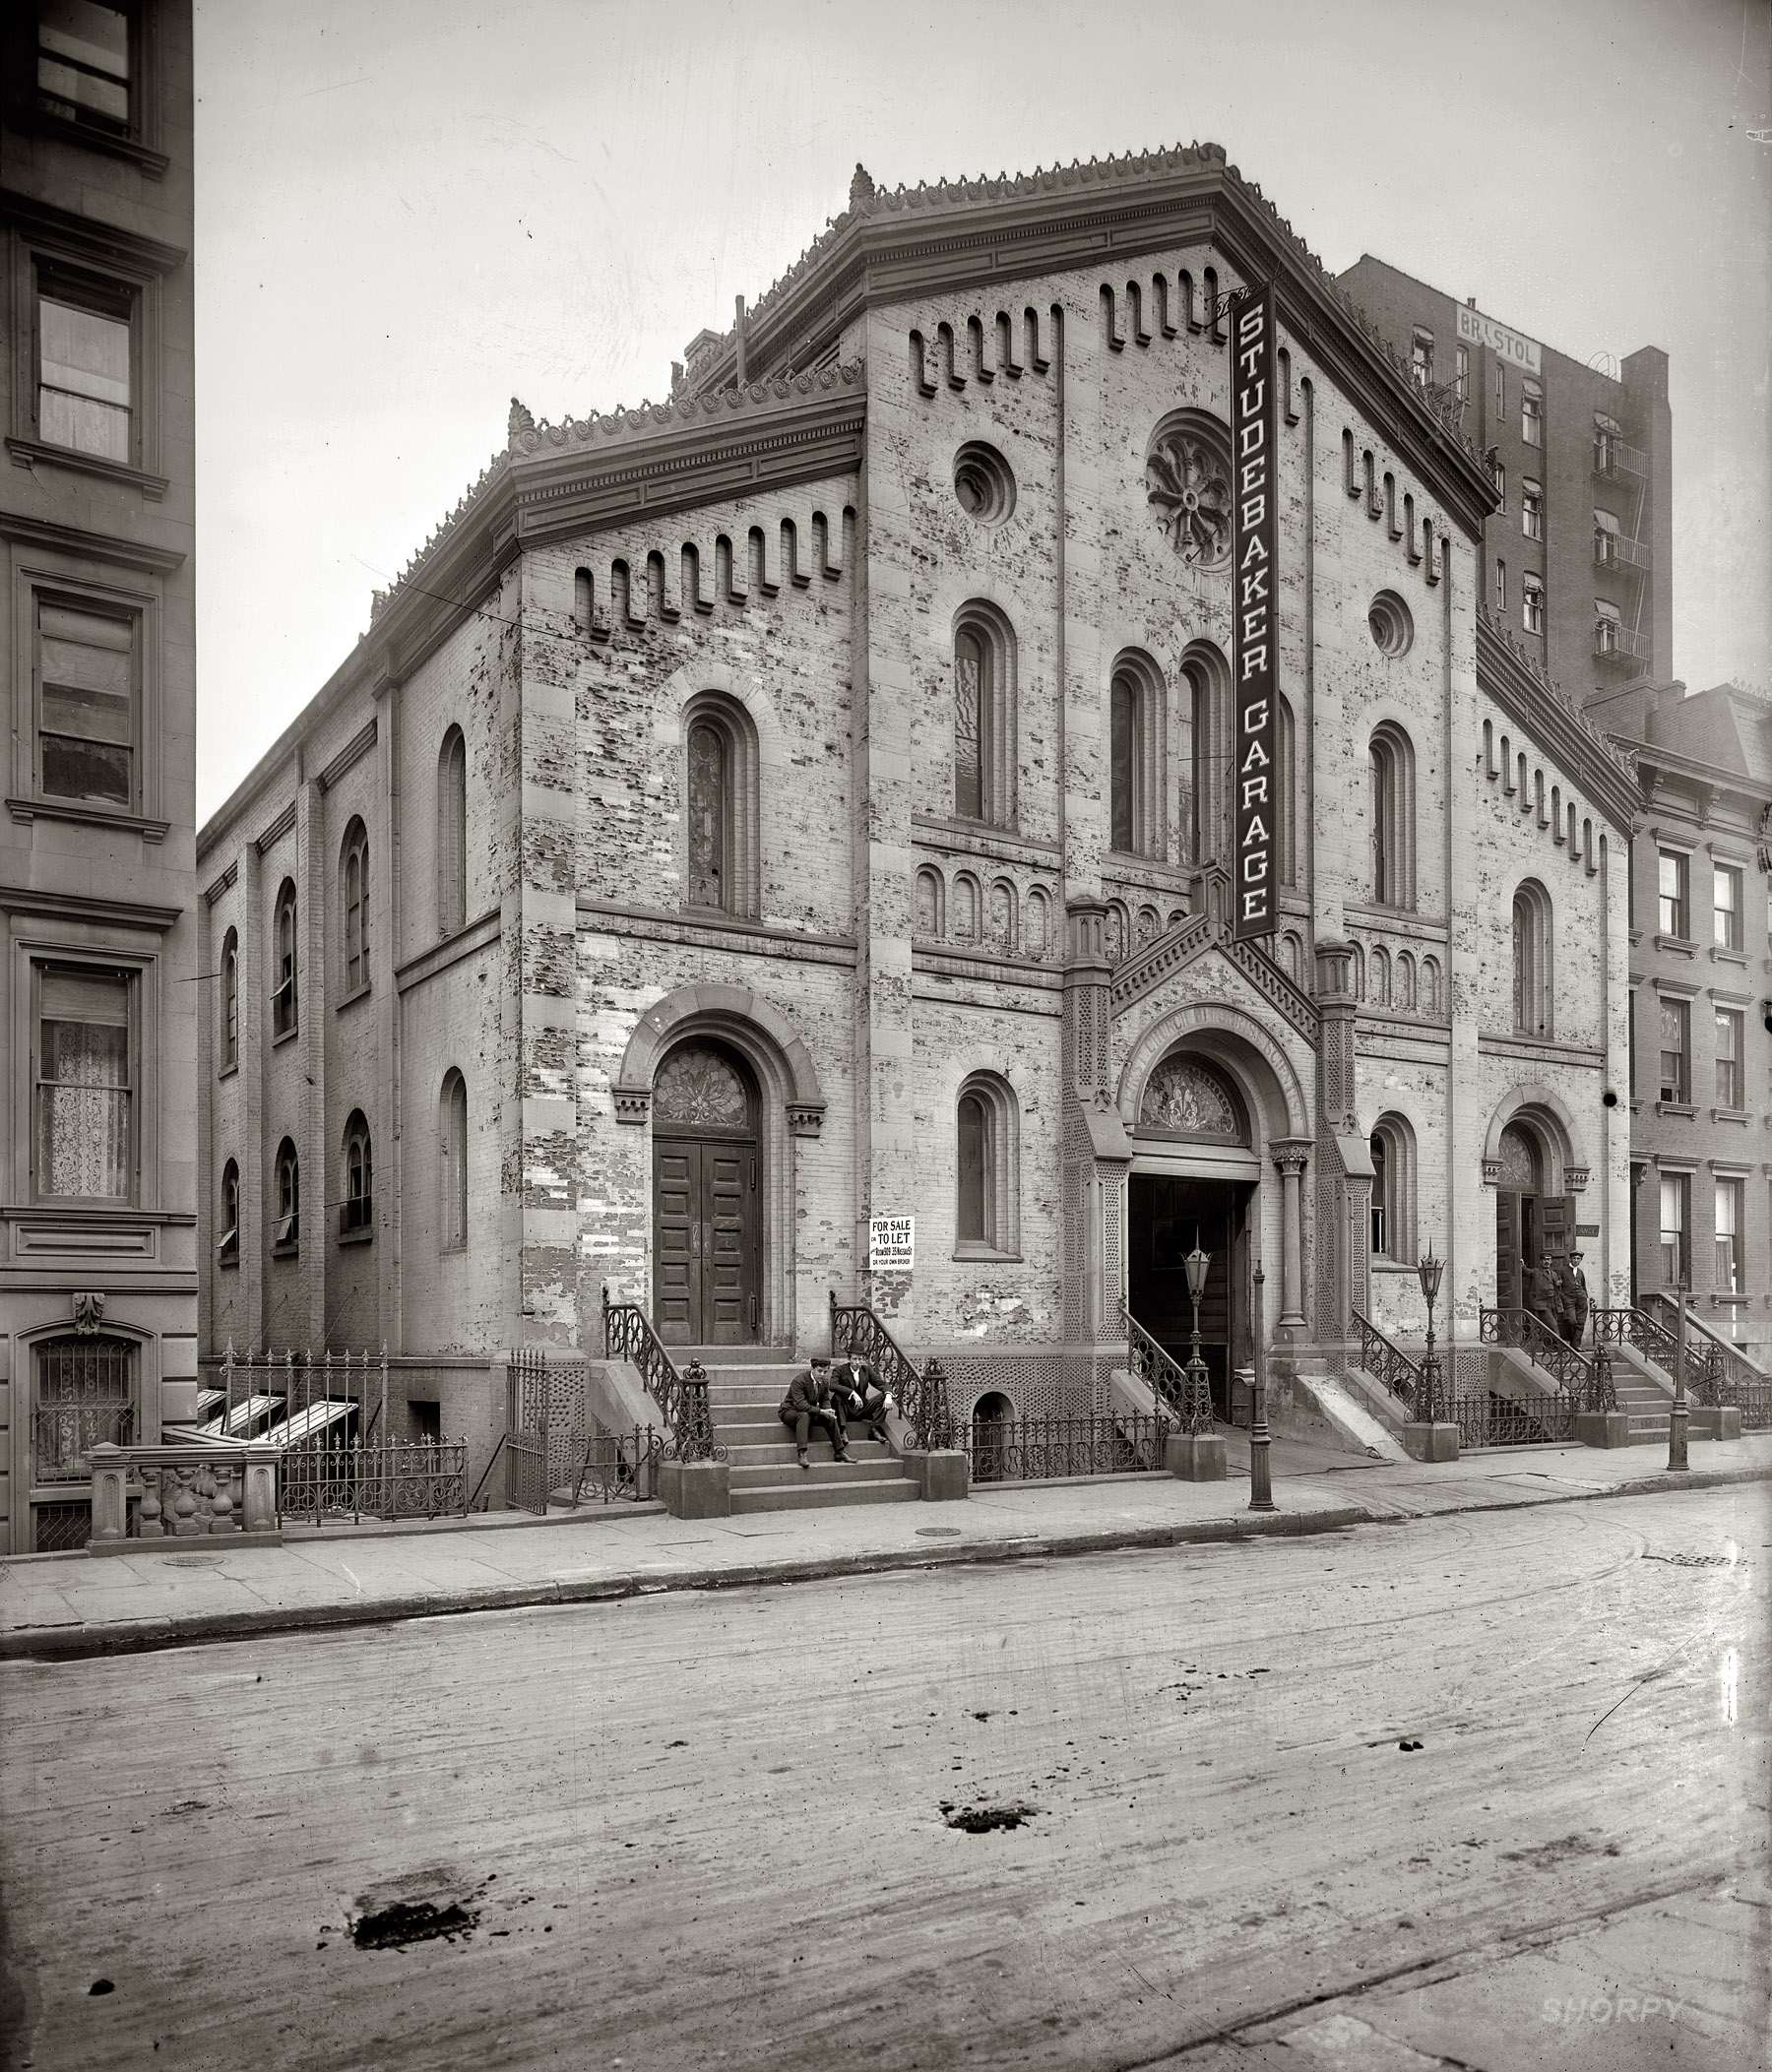 New York, 1908. "Old church on 48th Street." Studebaker Garage, a former Christian Science house of worship, at 143 West 48th Street. View full size. 8x10 glass negative, George Grantham Bain Collection, Library of Congress.